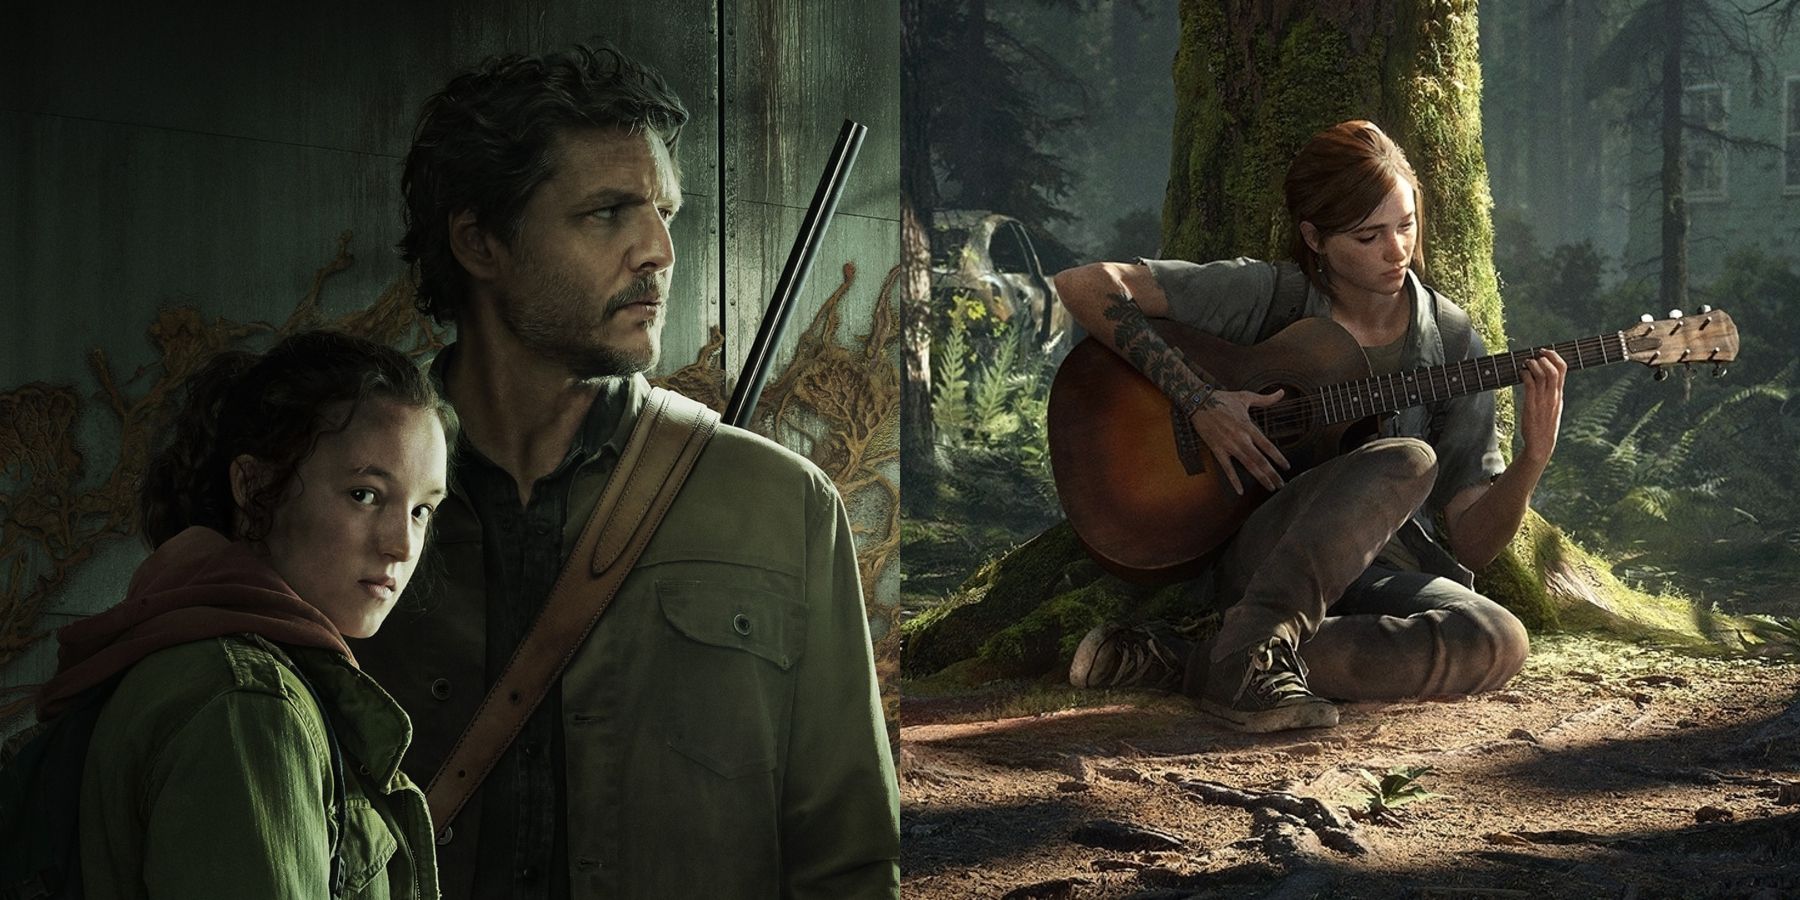 Location for 'The Last Of Us' Season 2 filming revealed